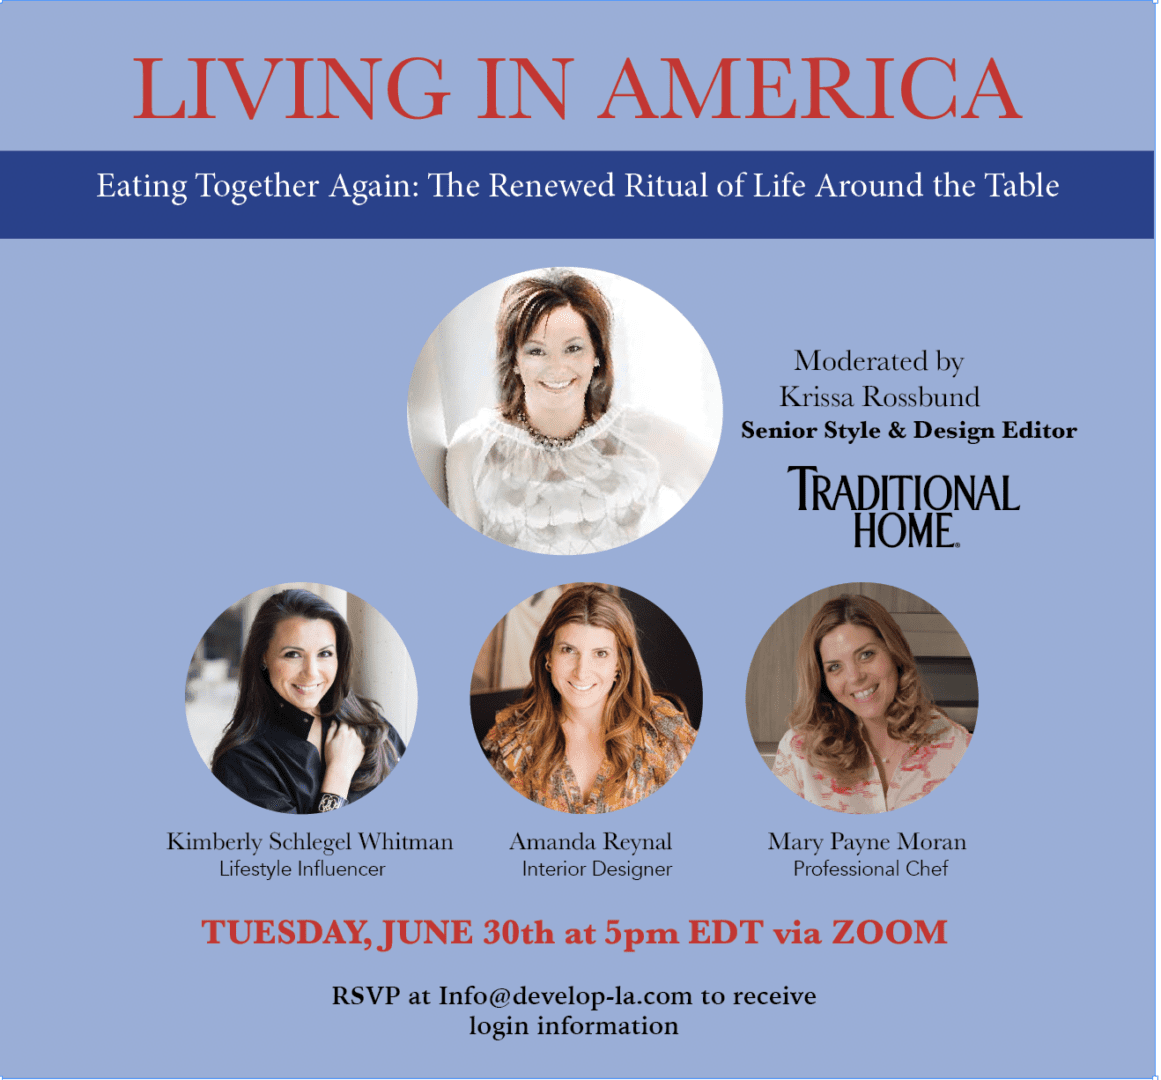 living in America event poster